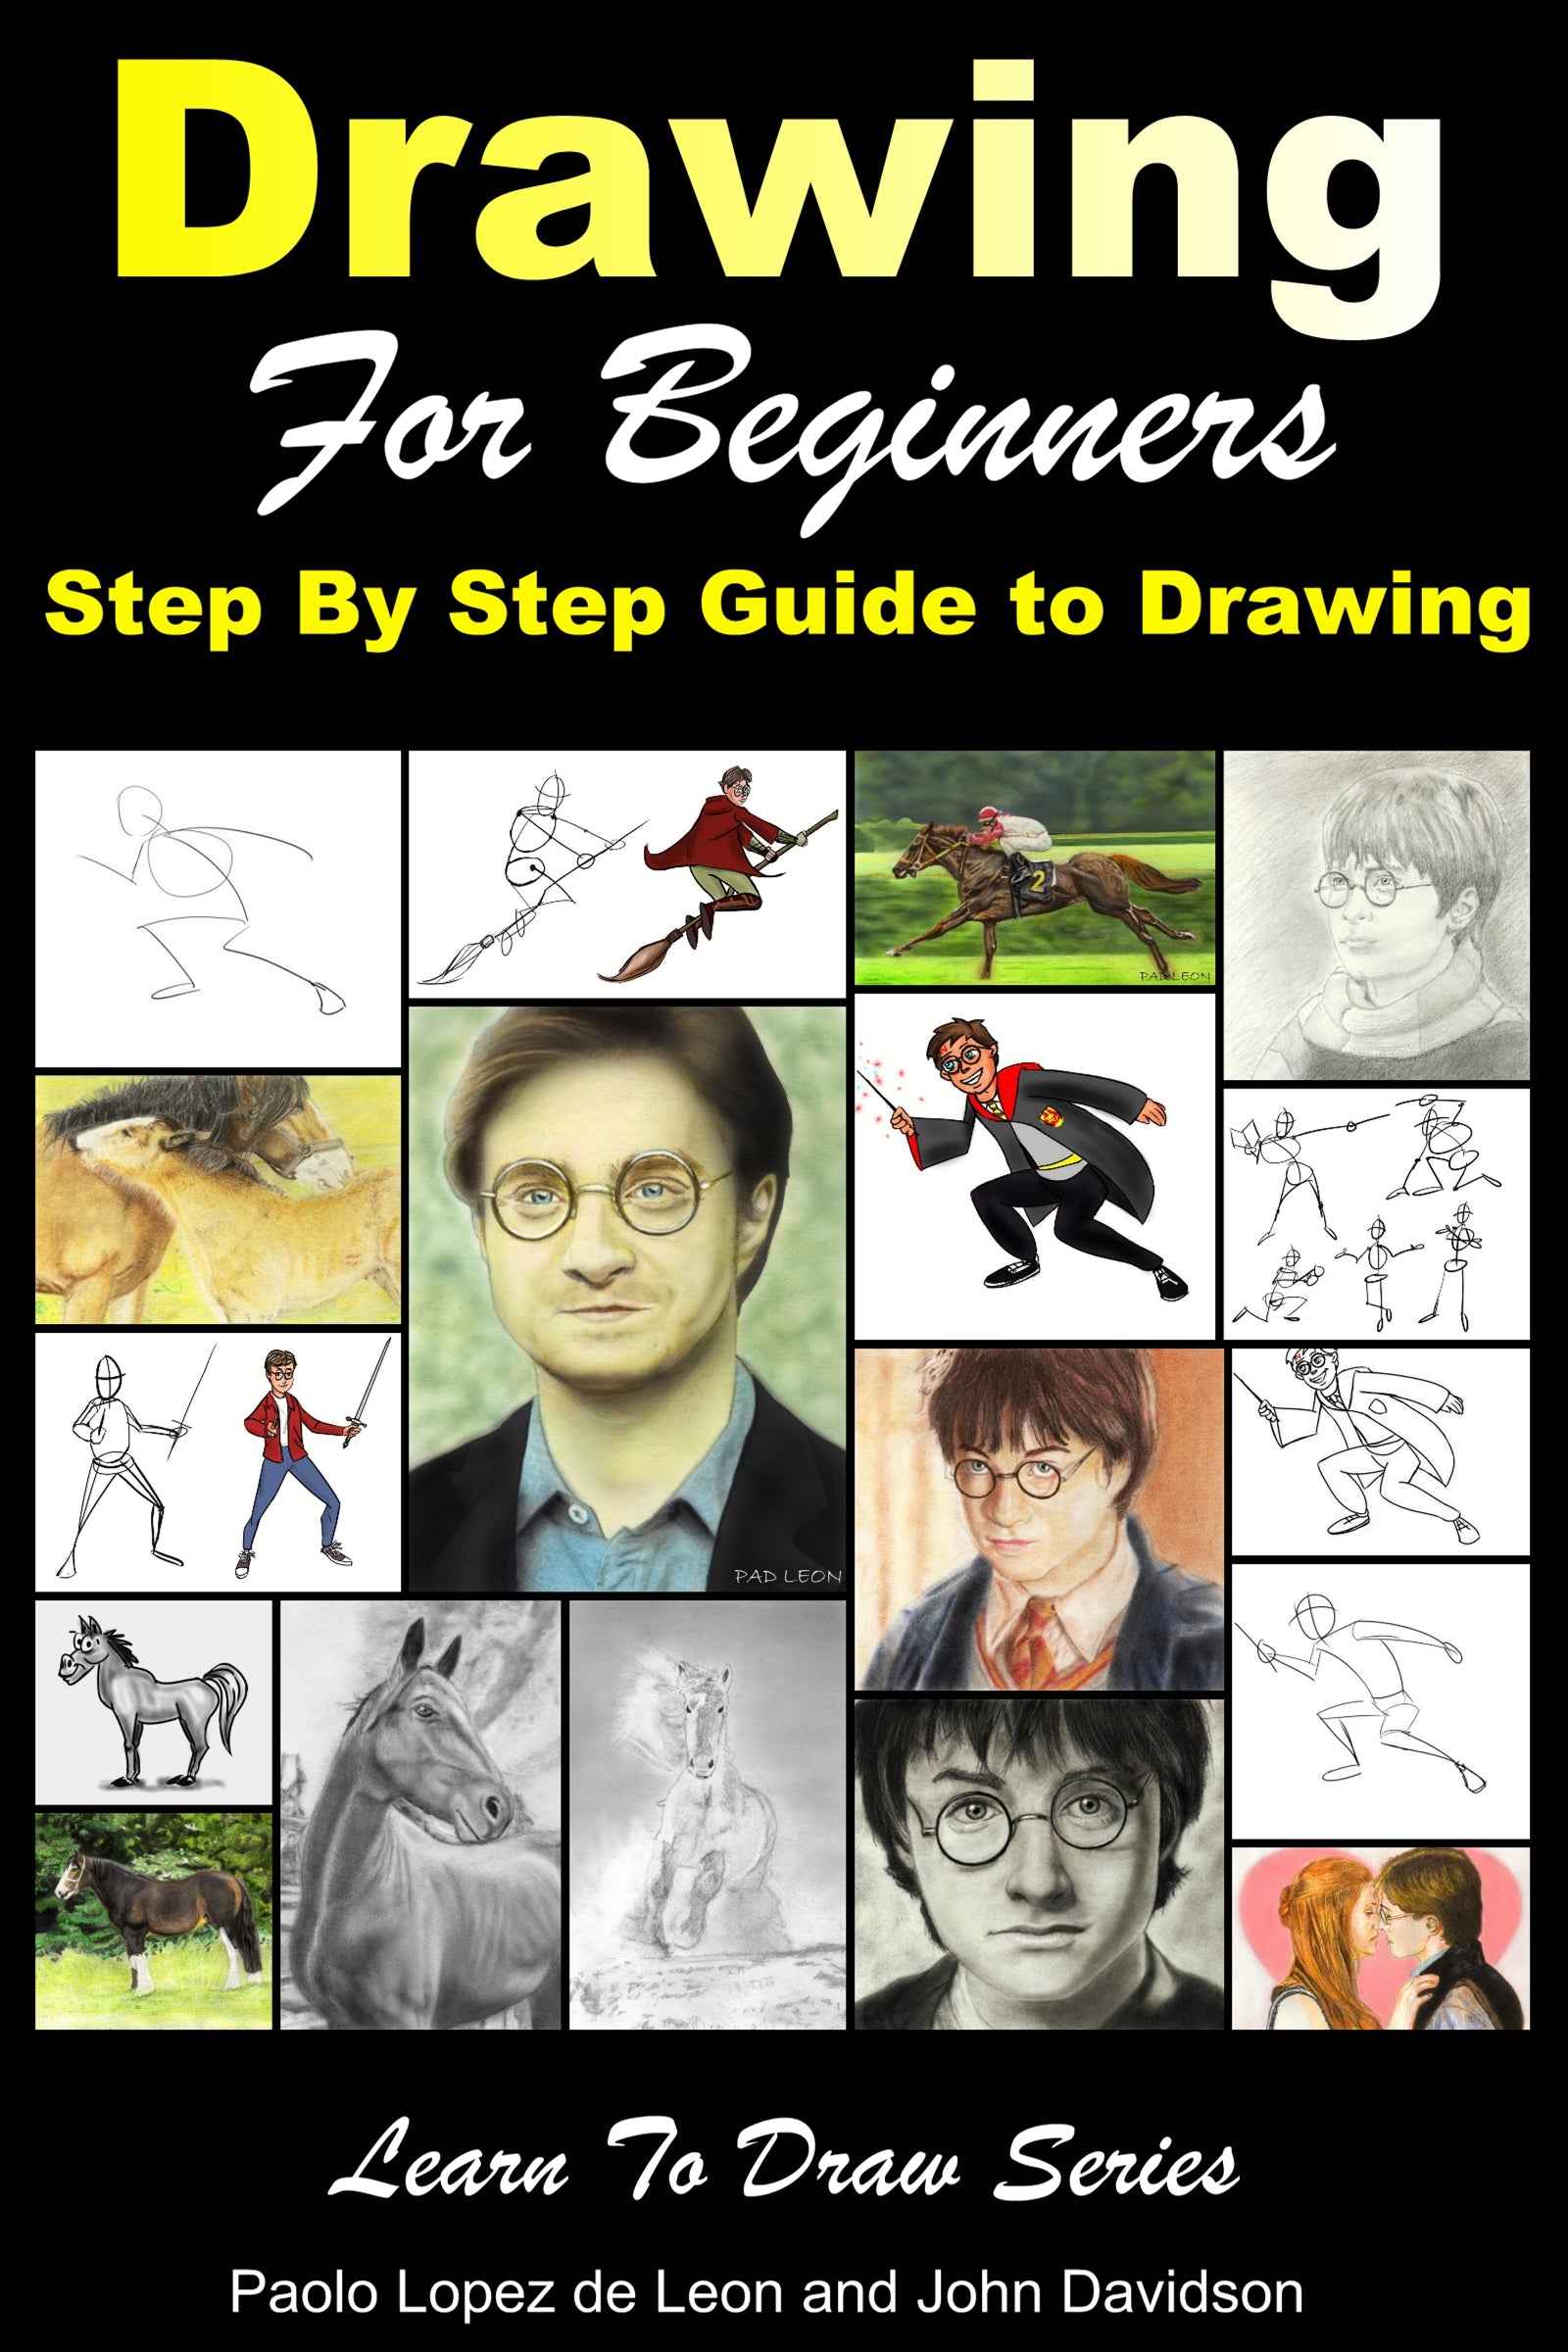 Drawing for Beginners - Step By Step Guide to Drawing – Learn to Draw Books